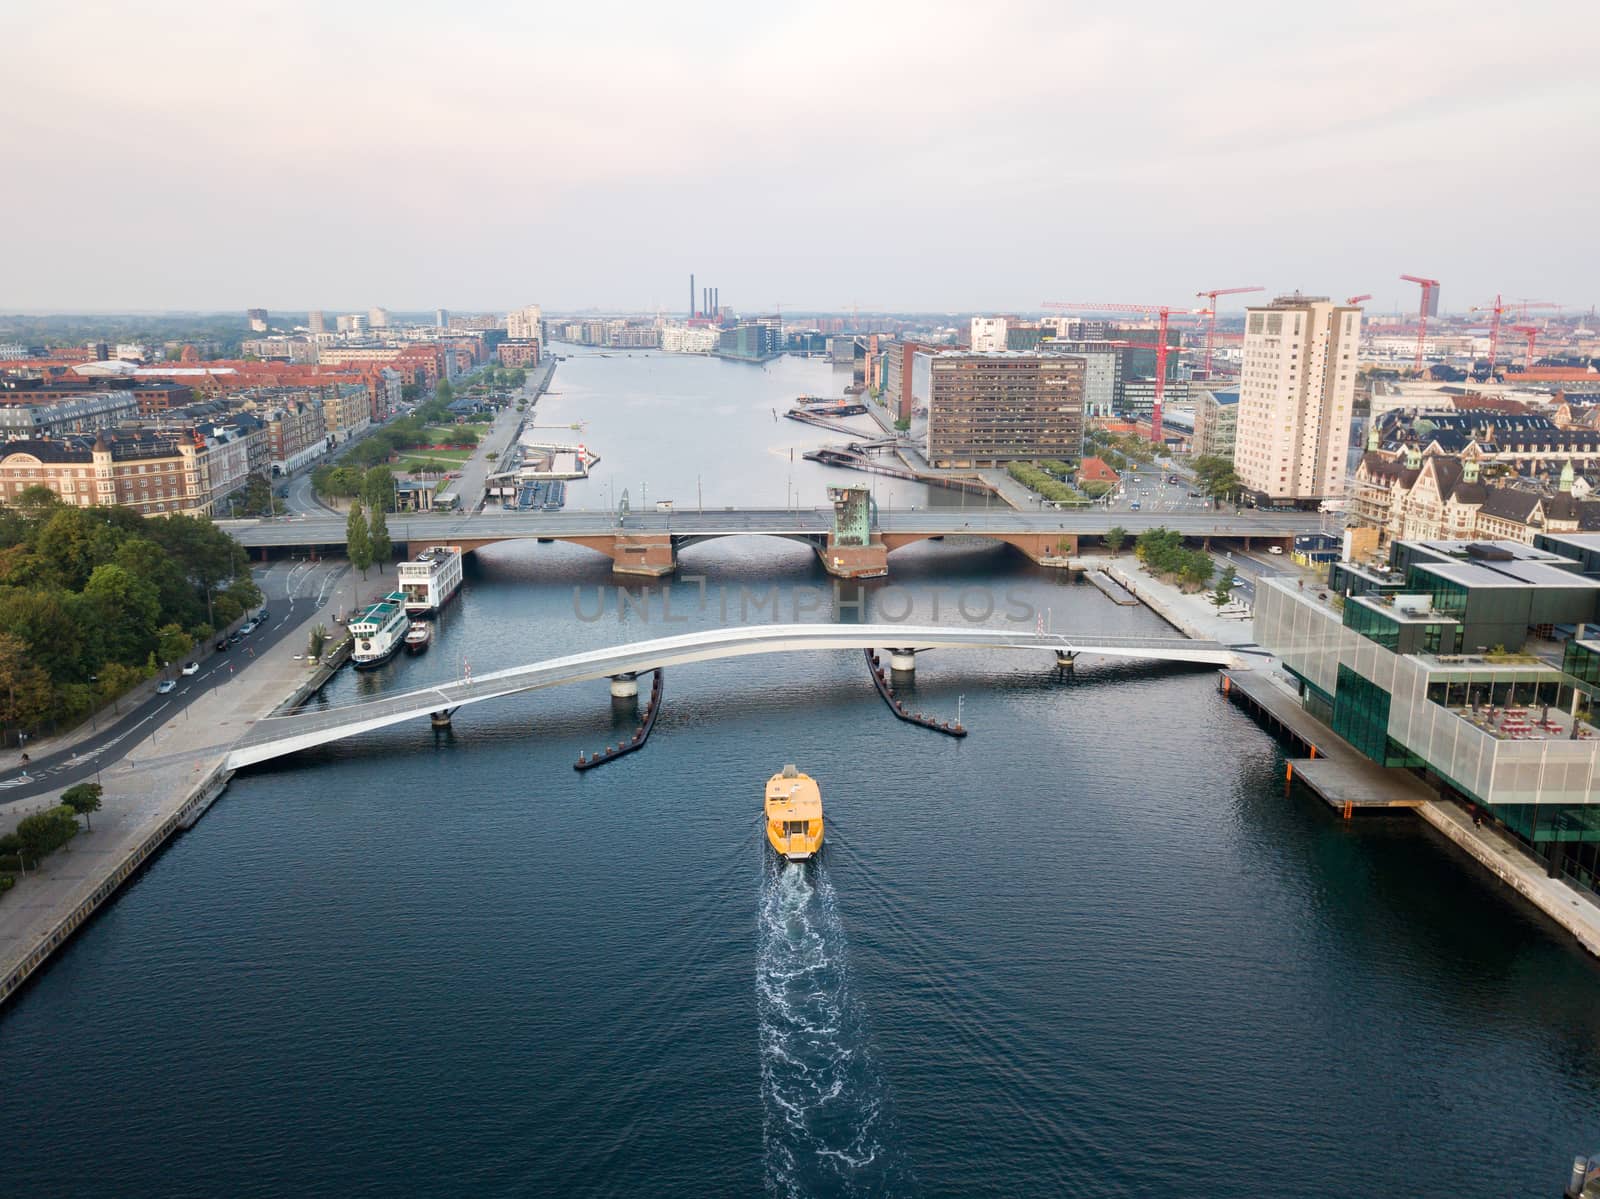 Copenhagen, Denmark - August 27, 2019: Aerial drone view of the old bridge Langebro and the modern pedestrian and cycling bridge Lille Langebro.